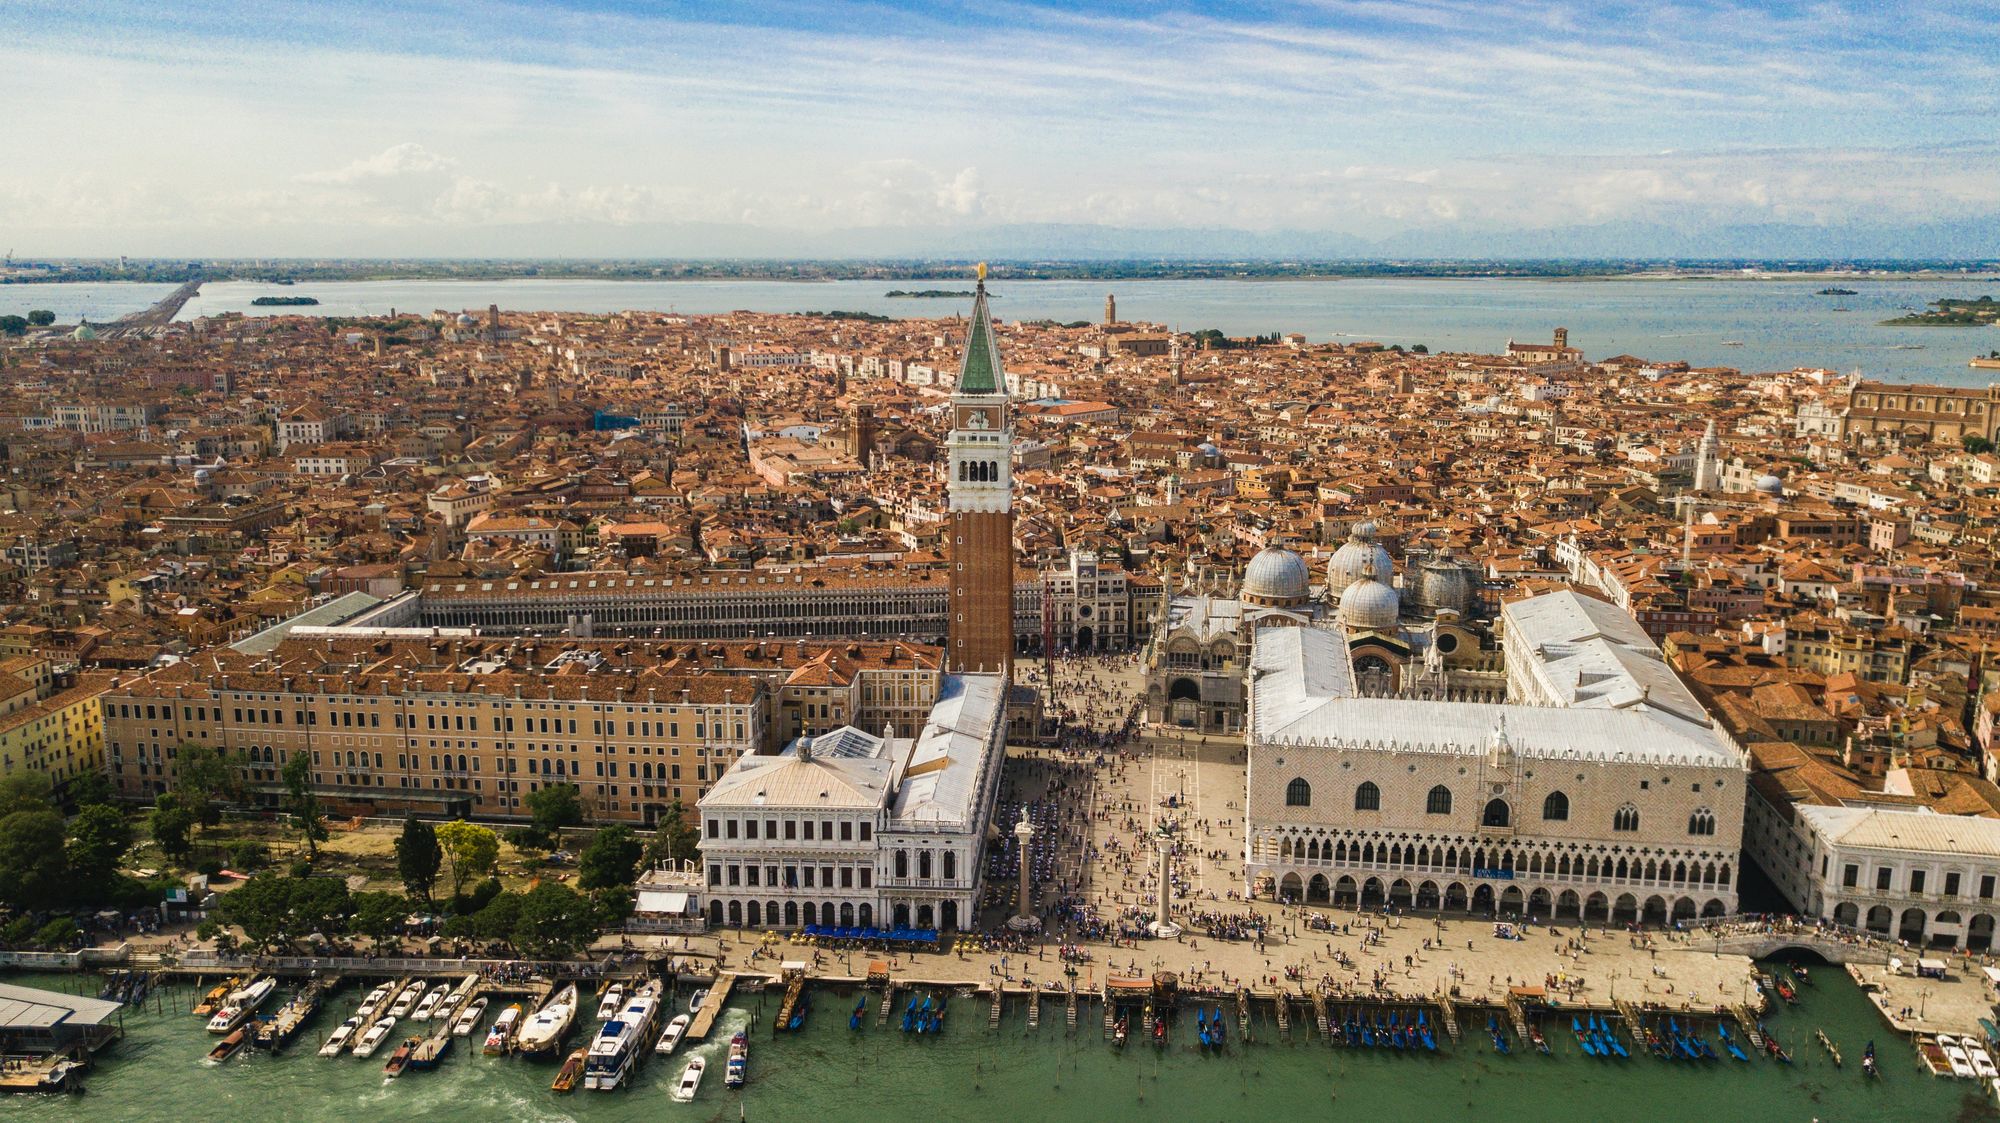 In the pic: aerial view of San Marco (Photo by Dmitry Artamonov - Pexels)